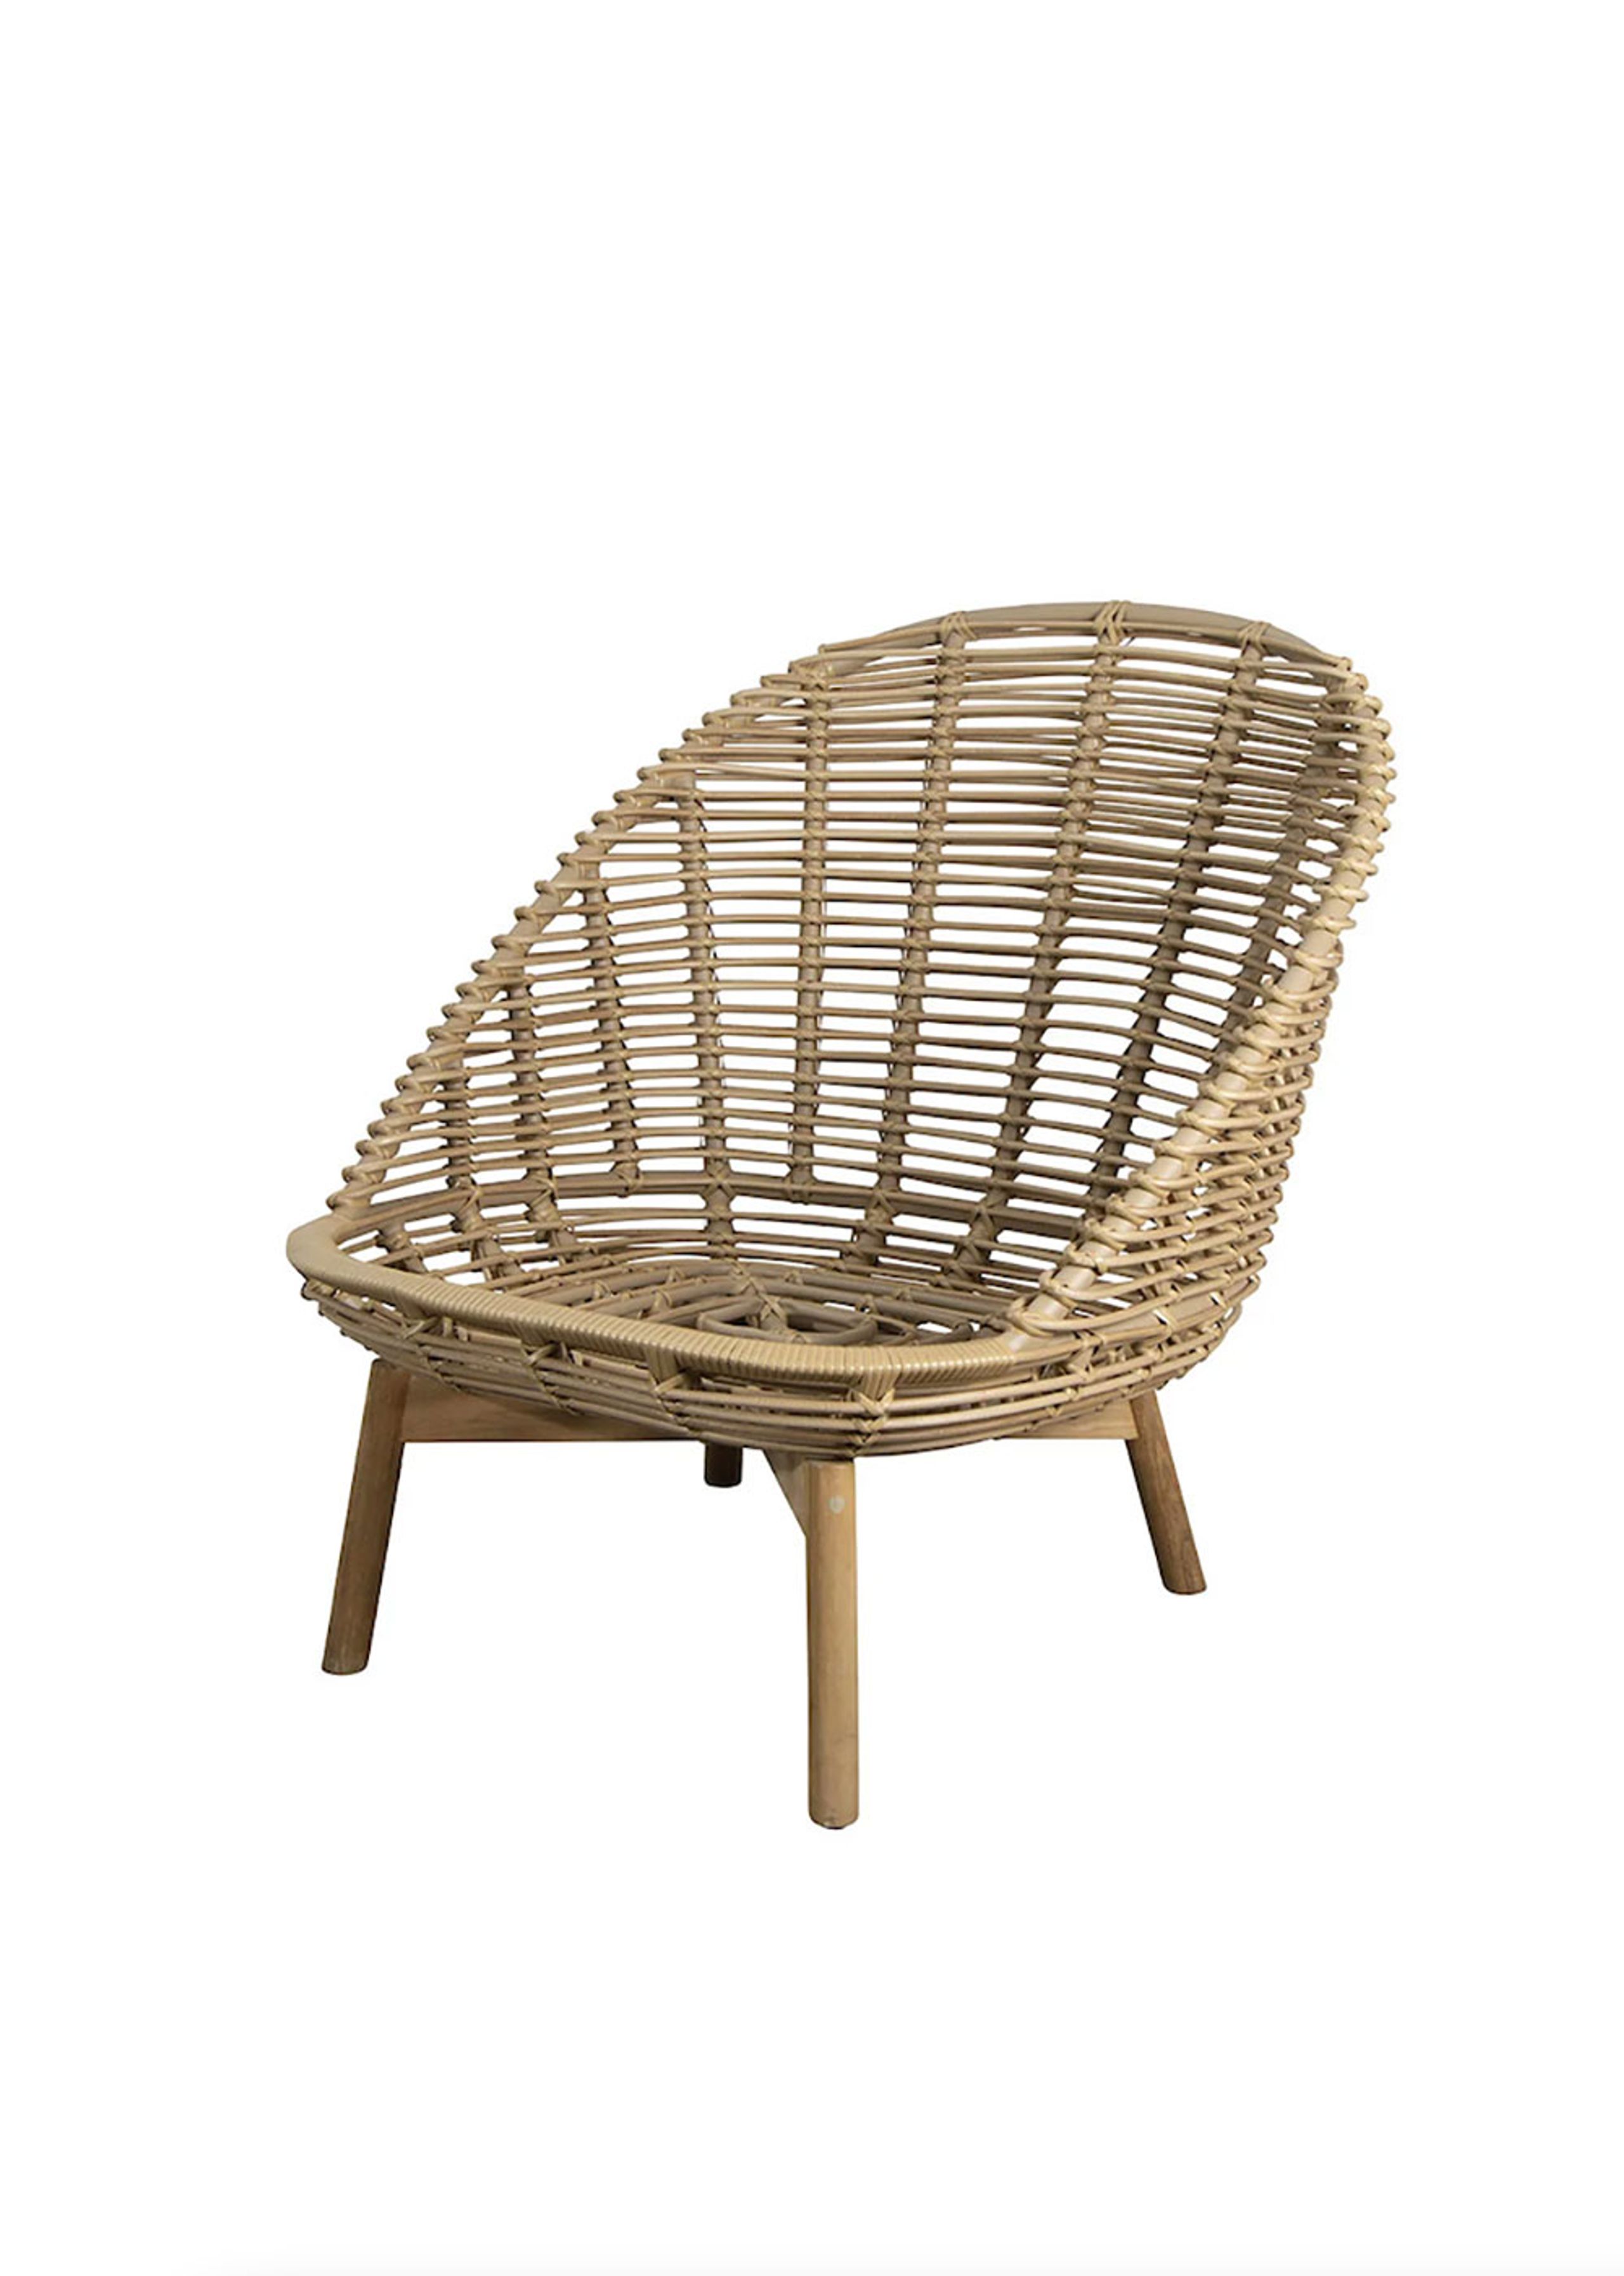 Cane-line - Lounge chair - Hive Lounge Chair - Seat: Natural, Cane-line Weave UT 3 / Cushion: Taupe, Cane-line AirTouch